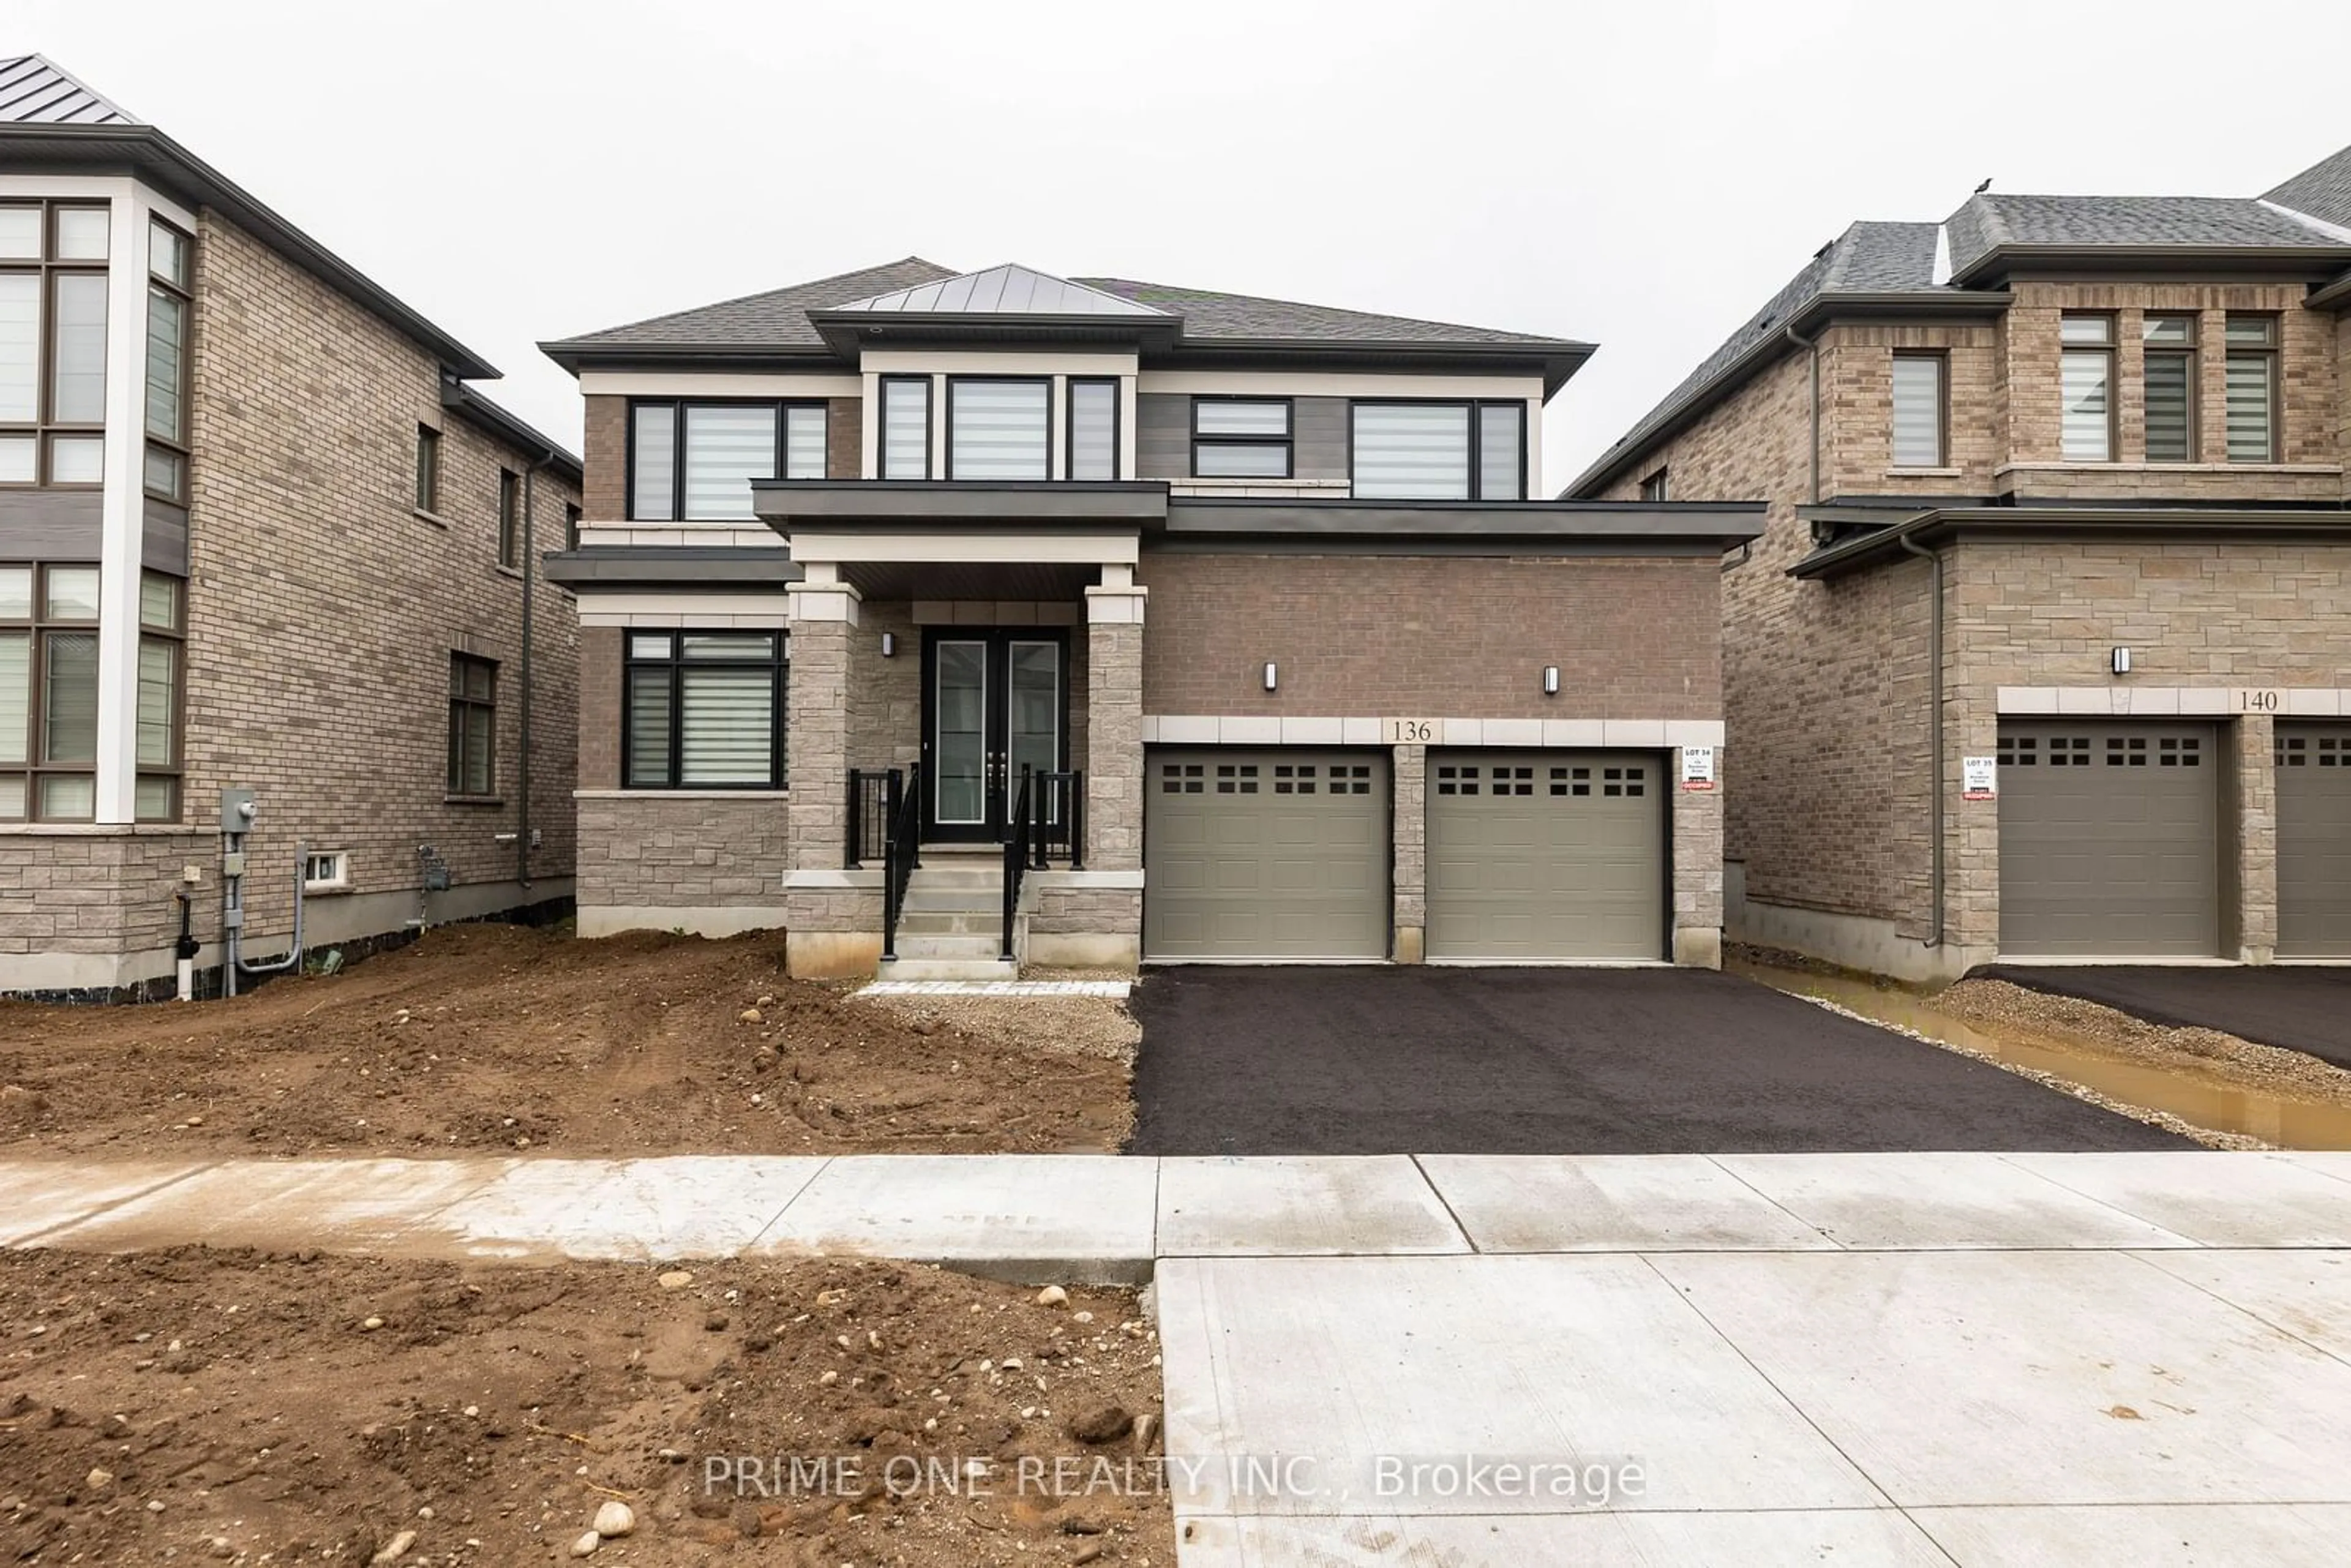 Frontside or backside of a home for 136 Blacklock St, Cambridge Ontario N1S 0E3